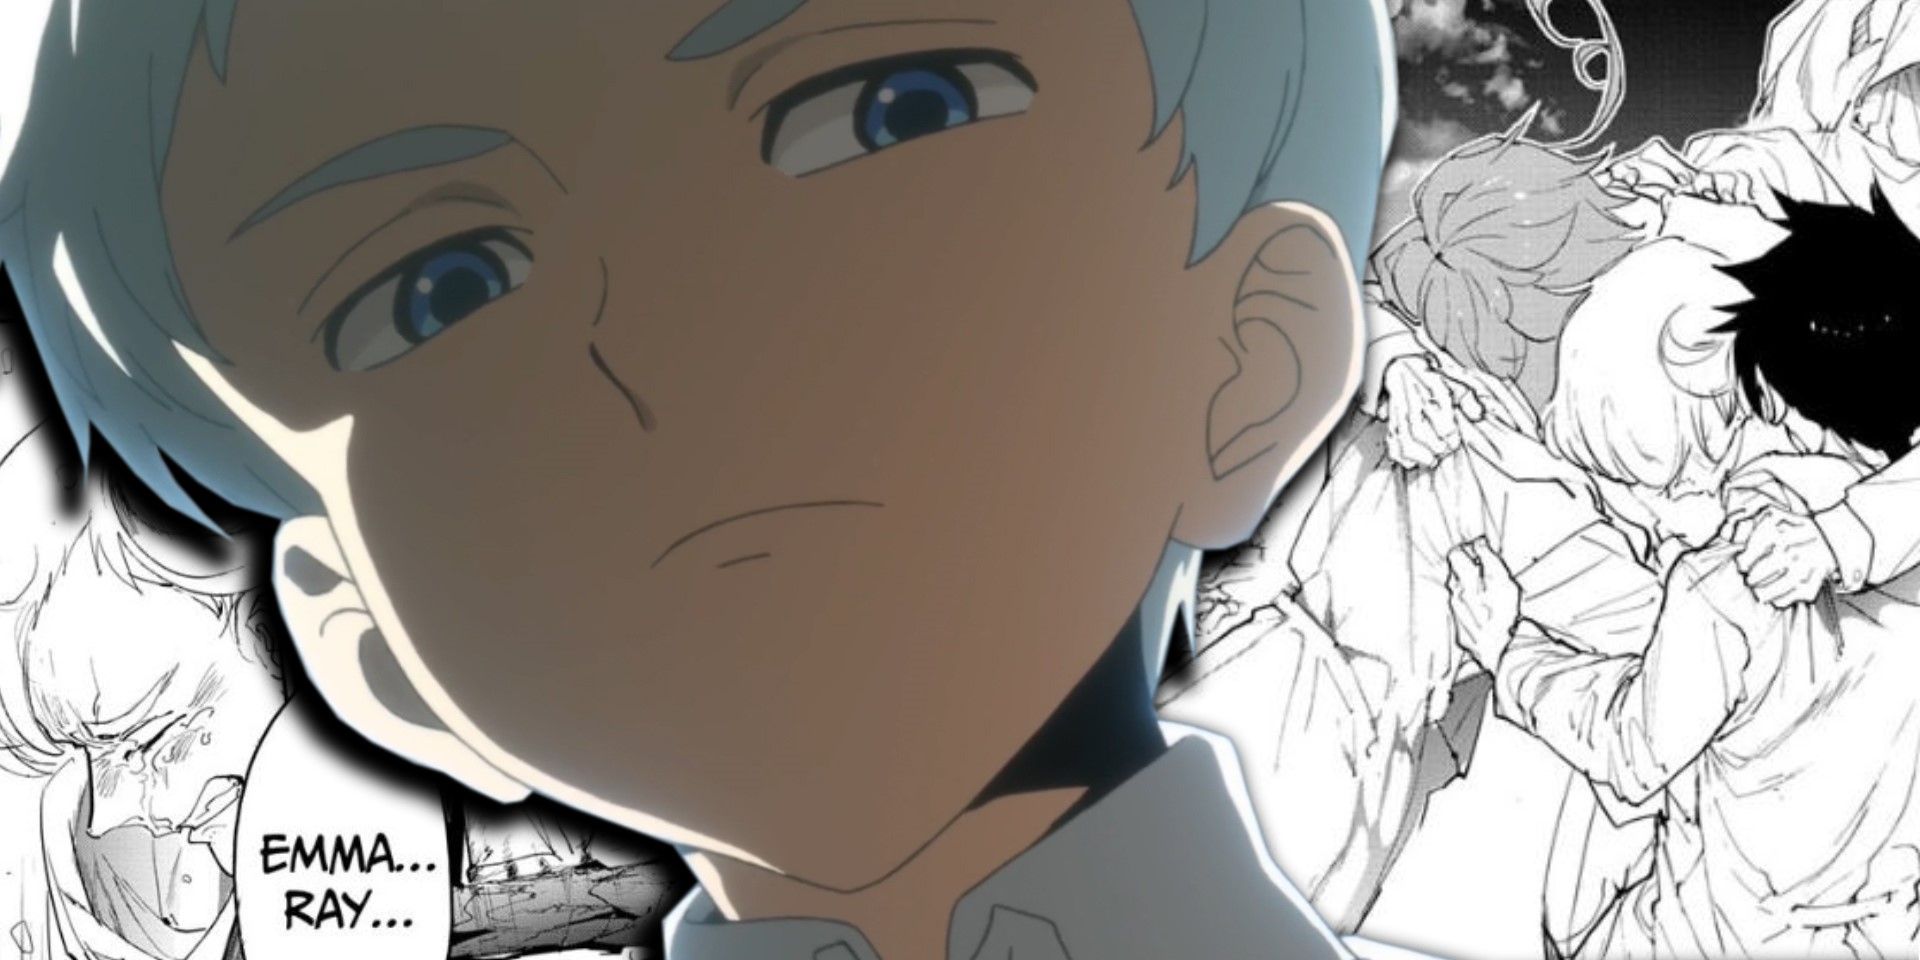 Norman just wants to live with Emma and Ray in The Promised Neverland.